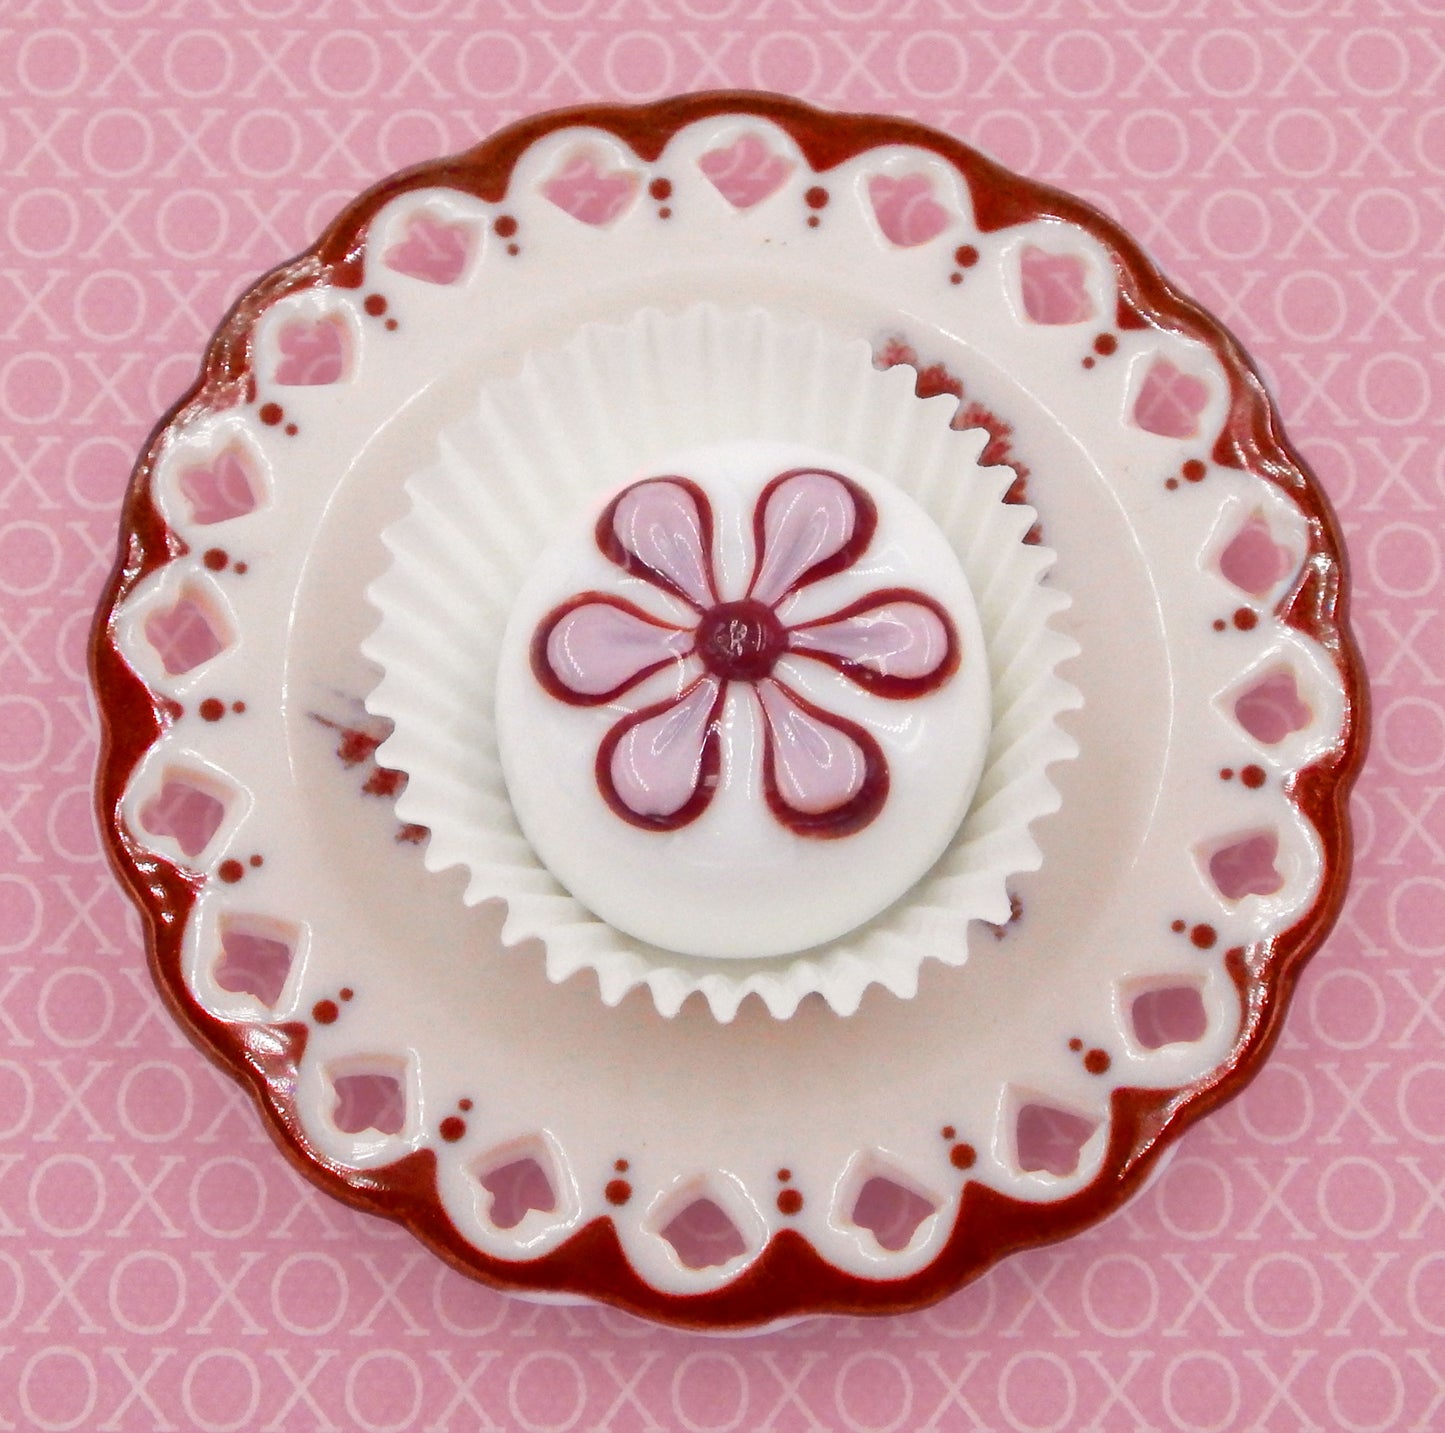 White Chocolate with Pansy Design (15-032WHS)